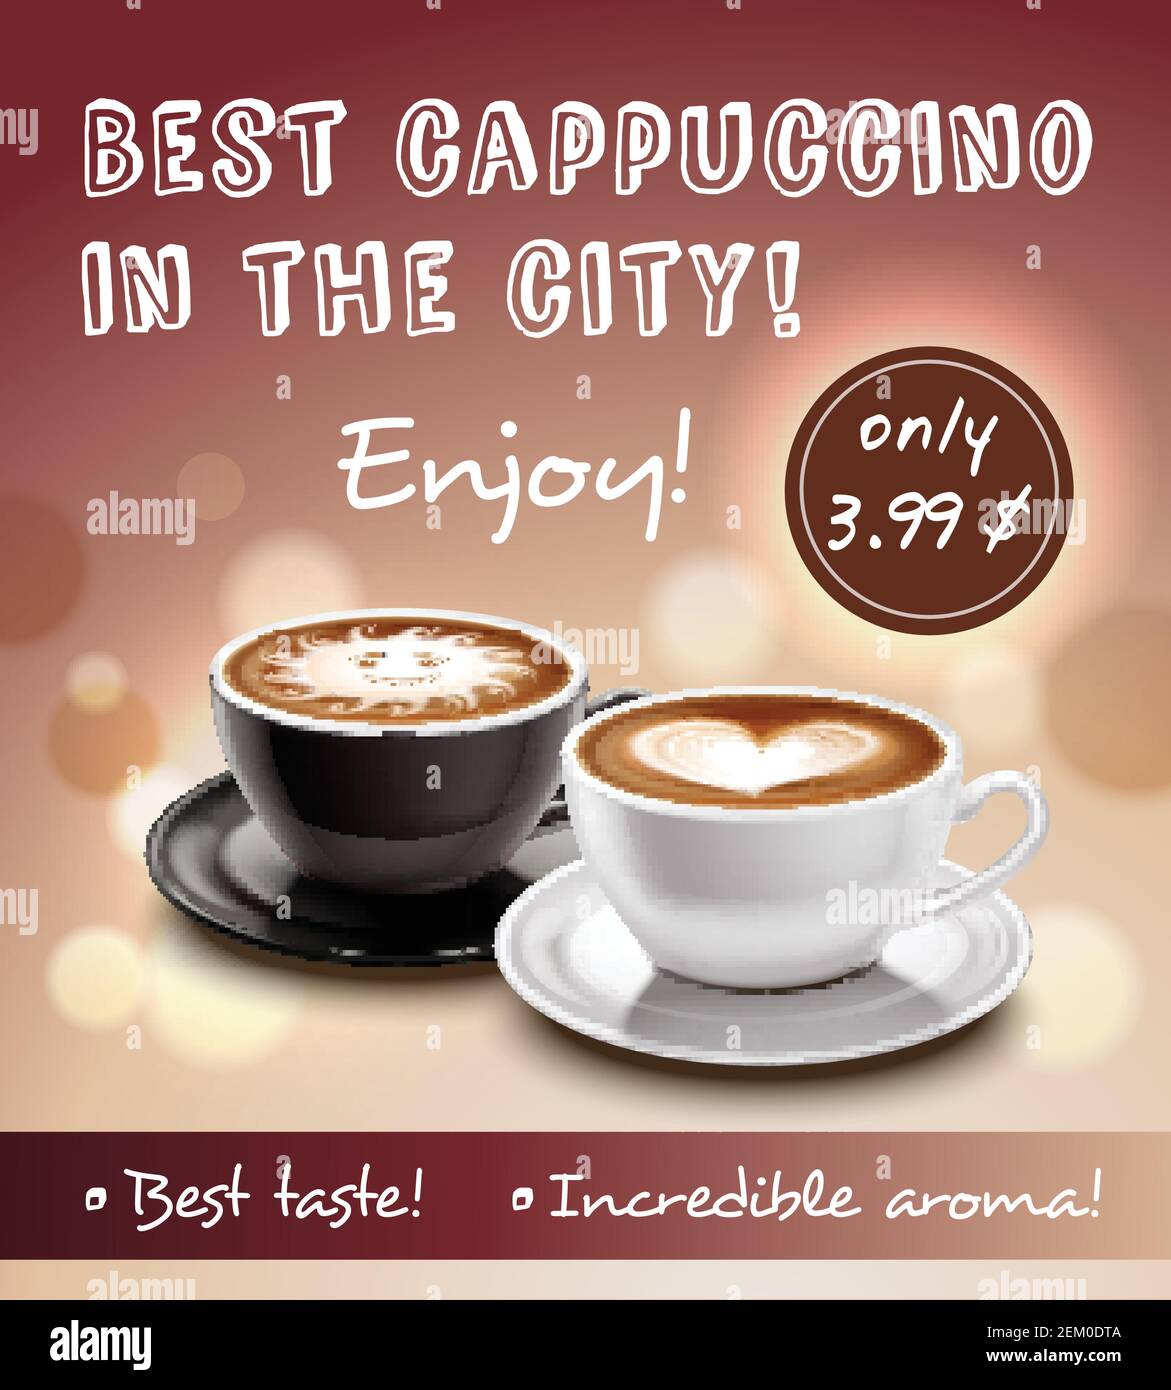 Coffee advertisement art poster with offer of best cappuccino in city at lowest price realistic vector illustration Stock Vector